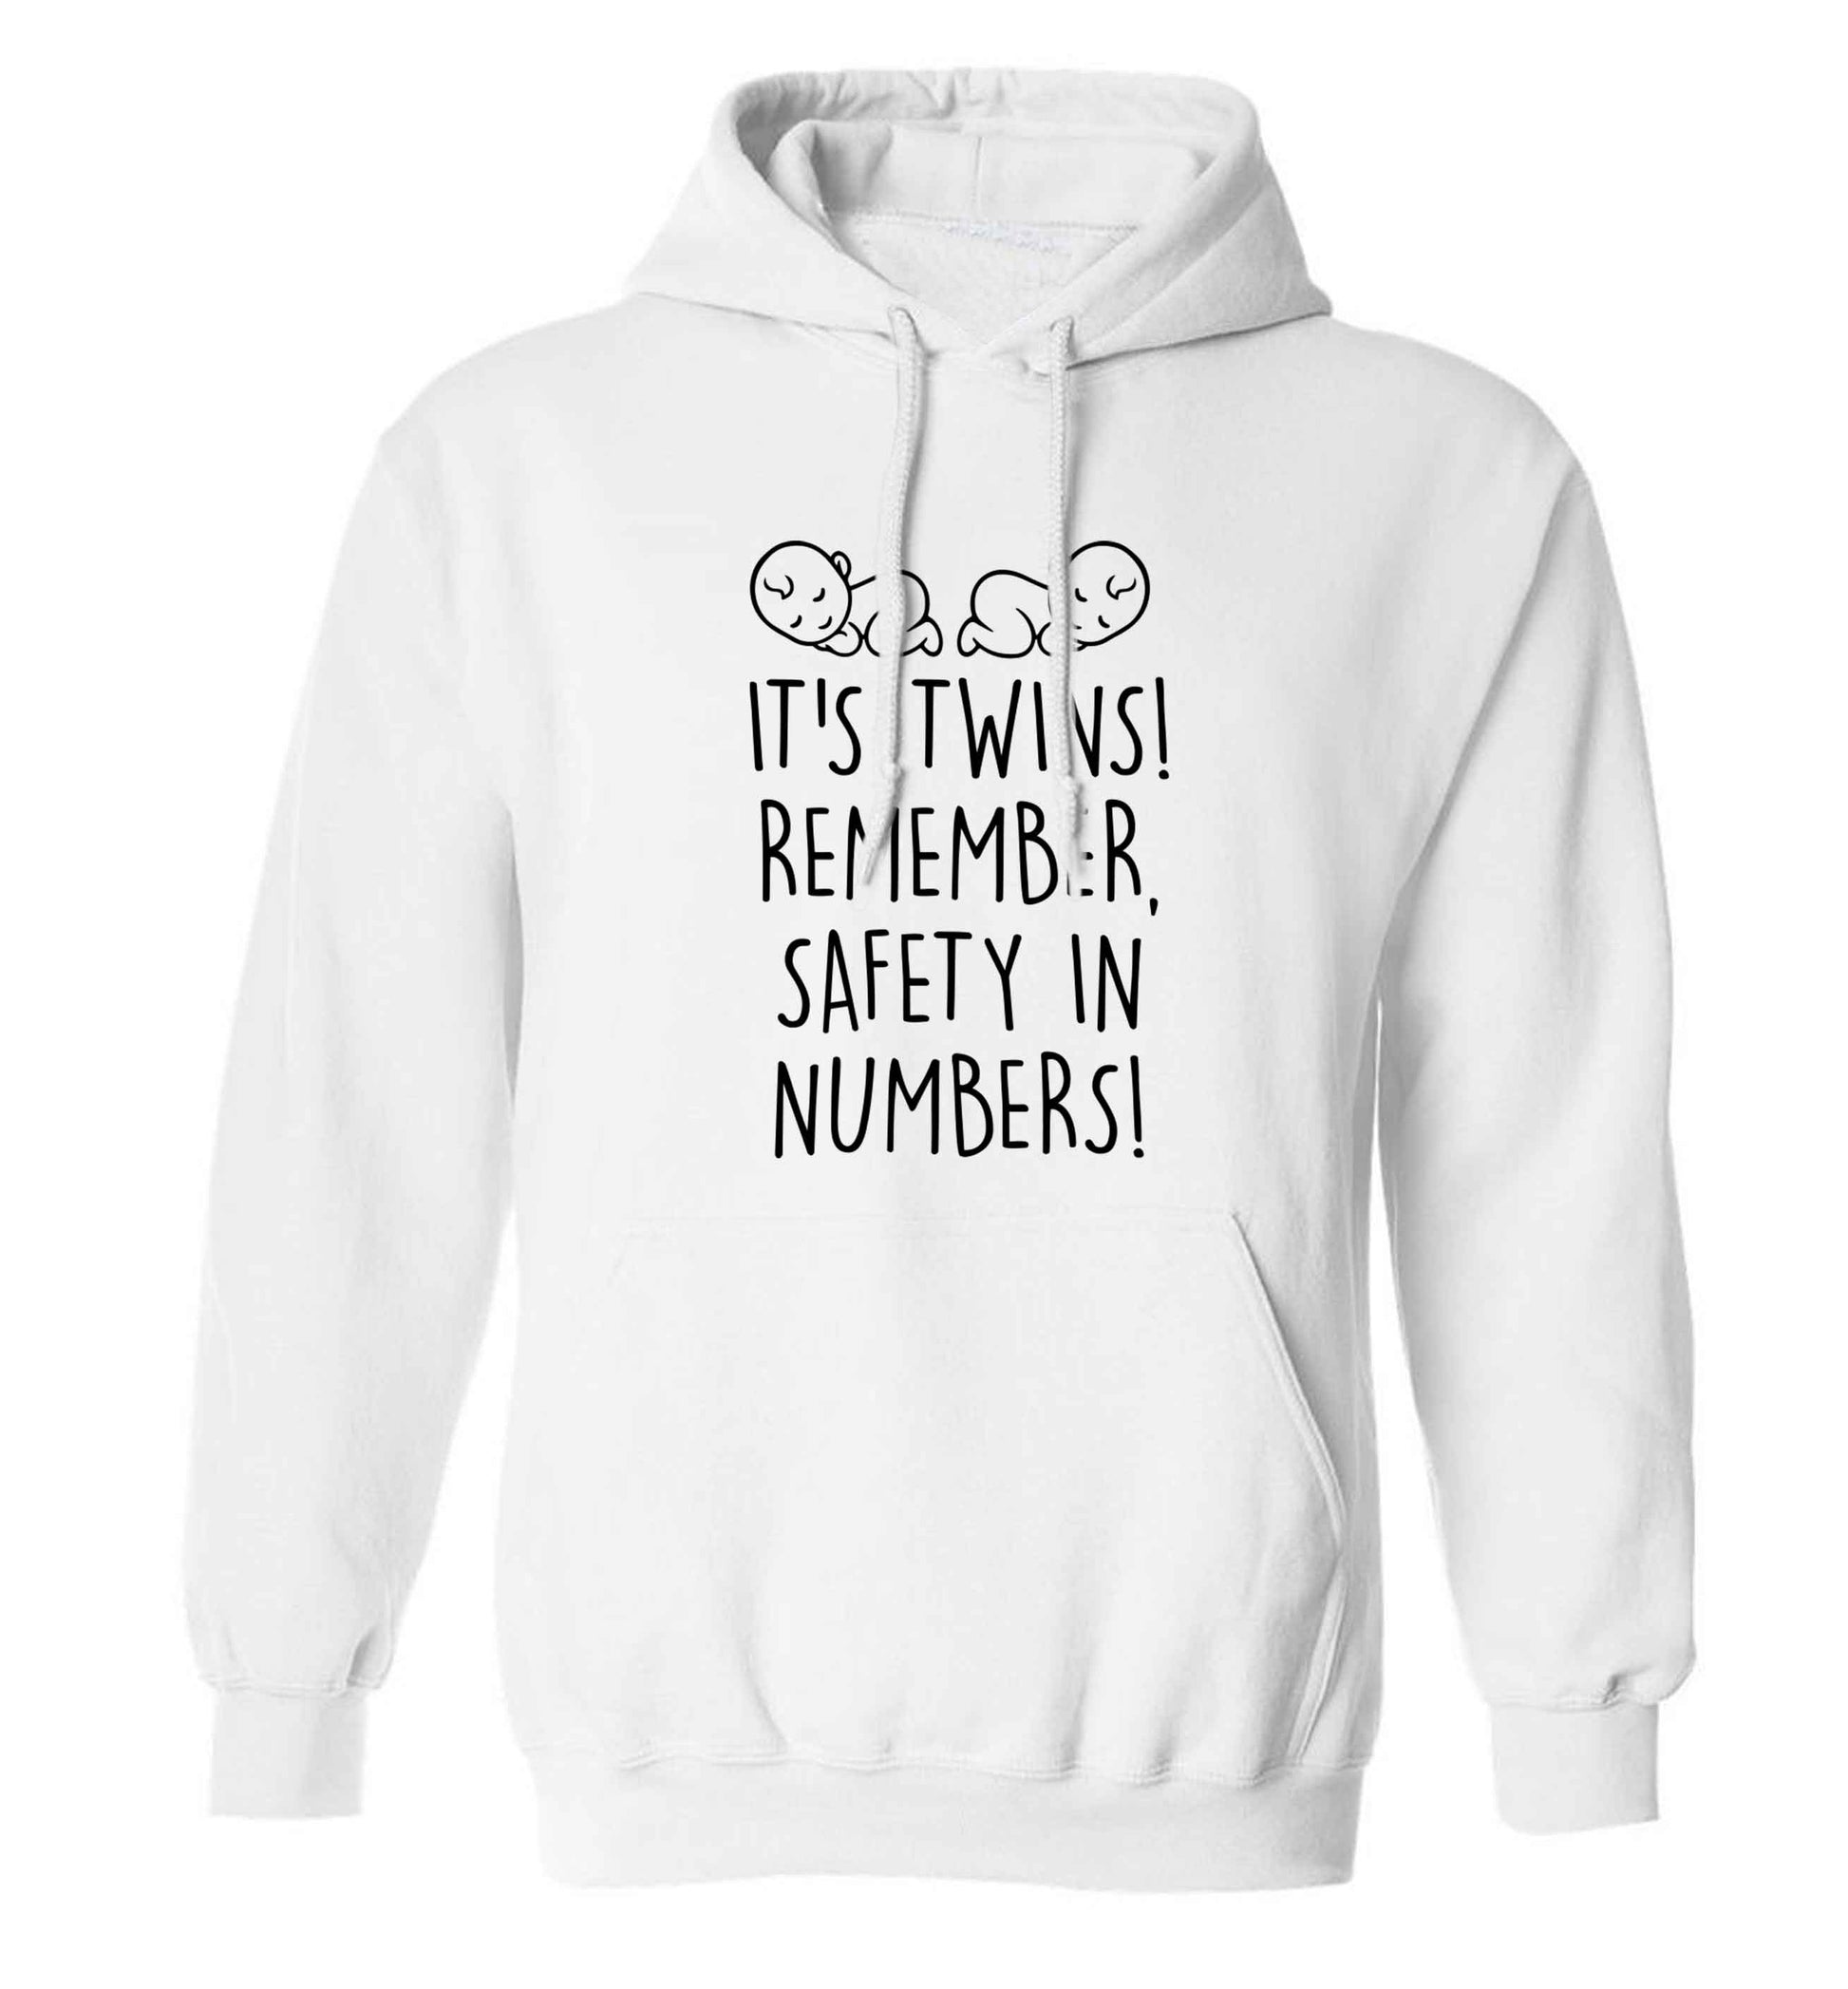 It's twins! Remember safety in numbers! adults unisex white hoodie 2XL